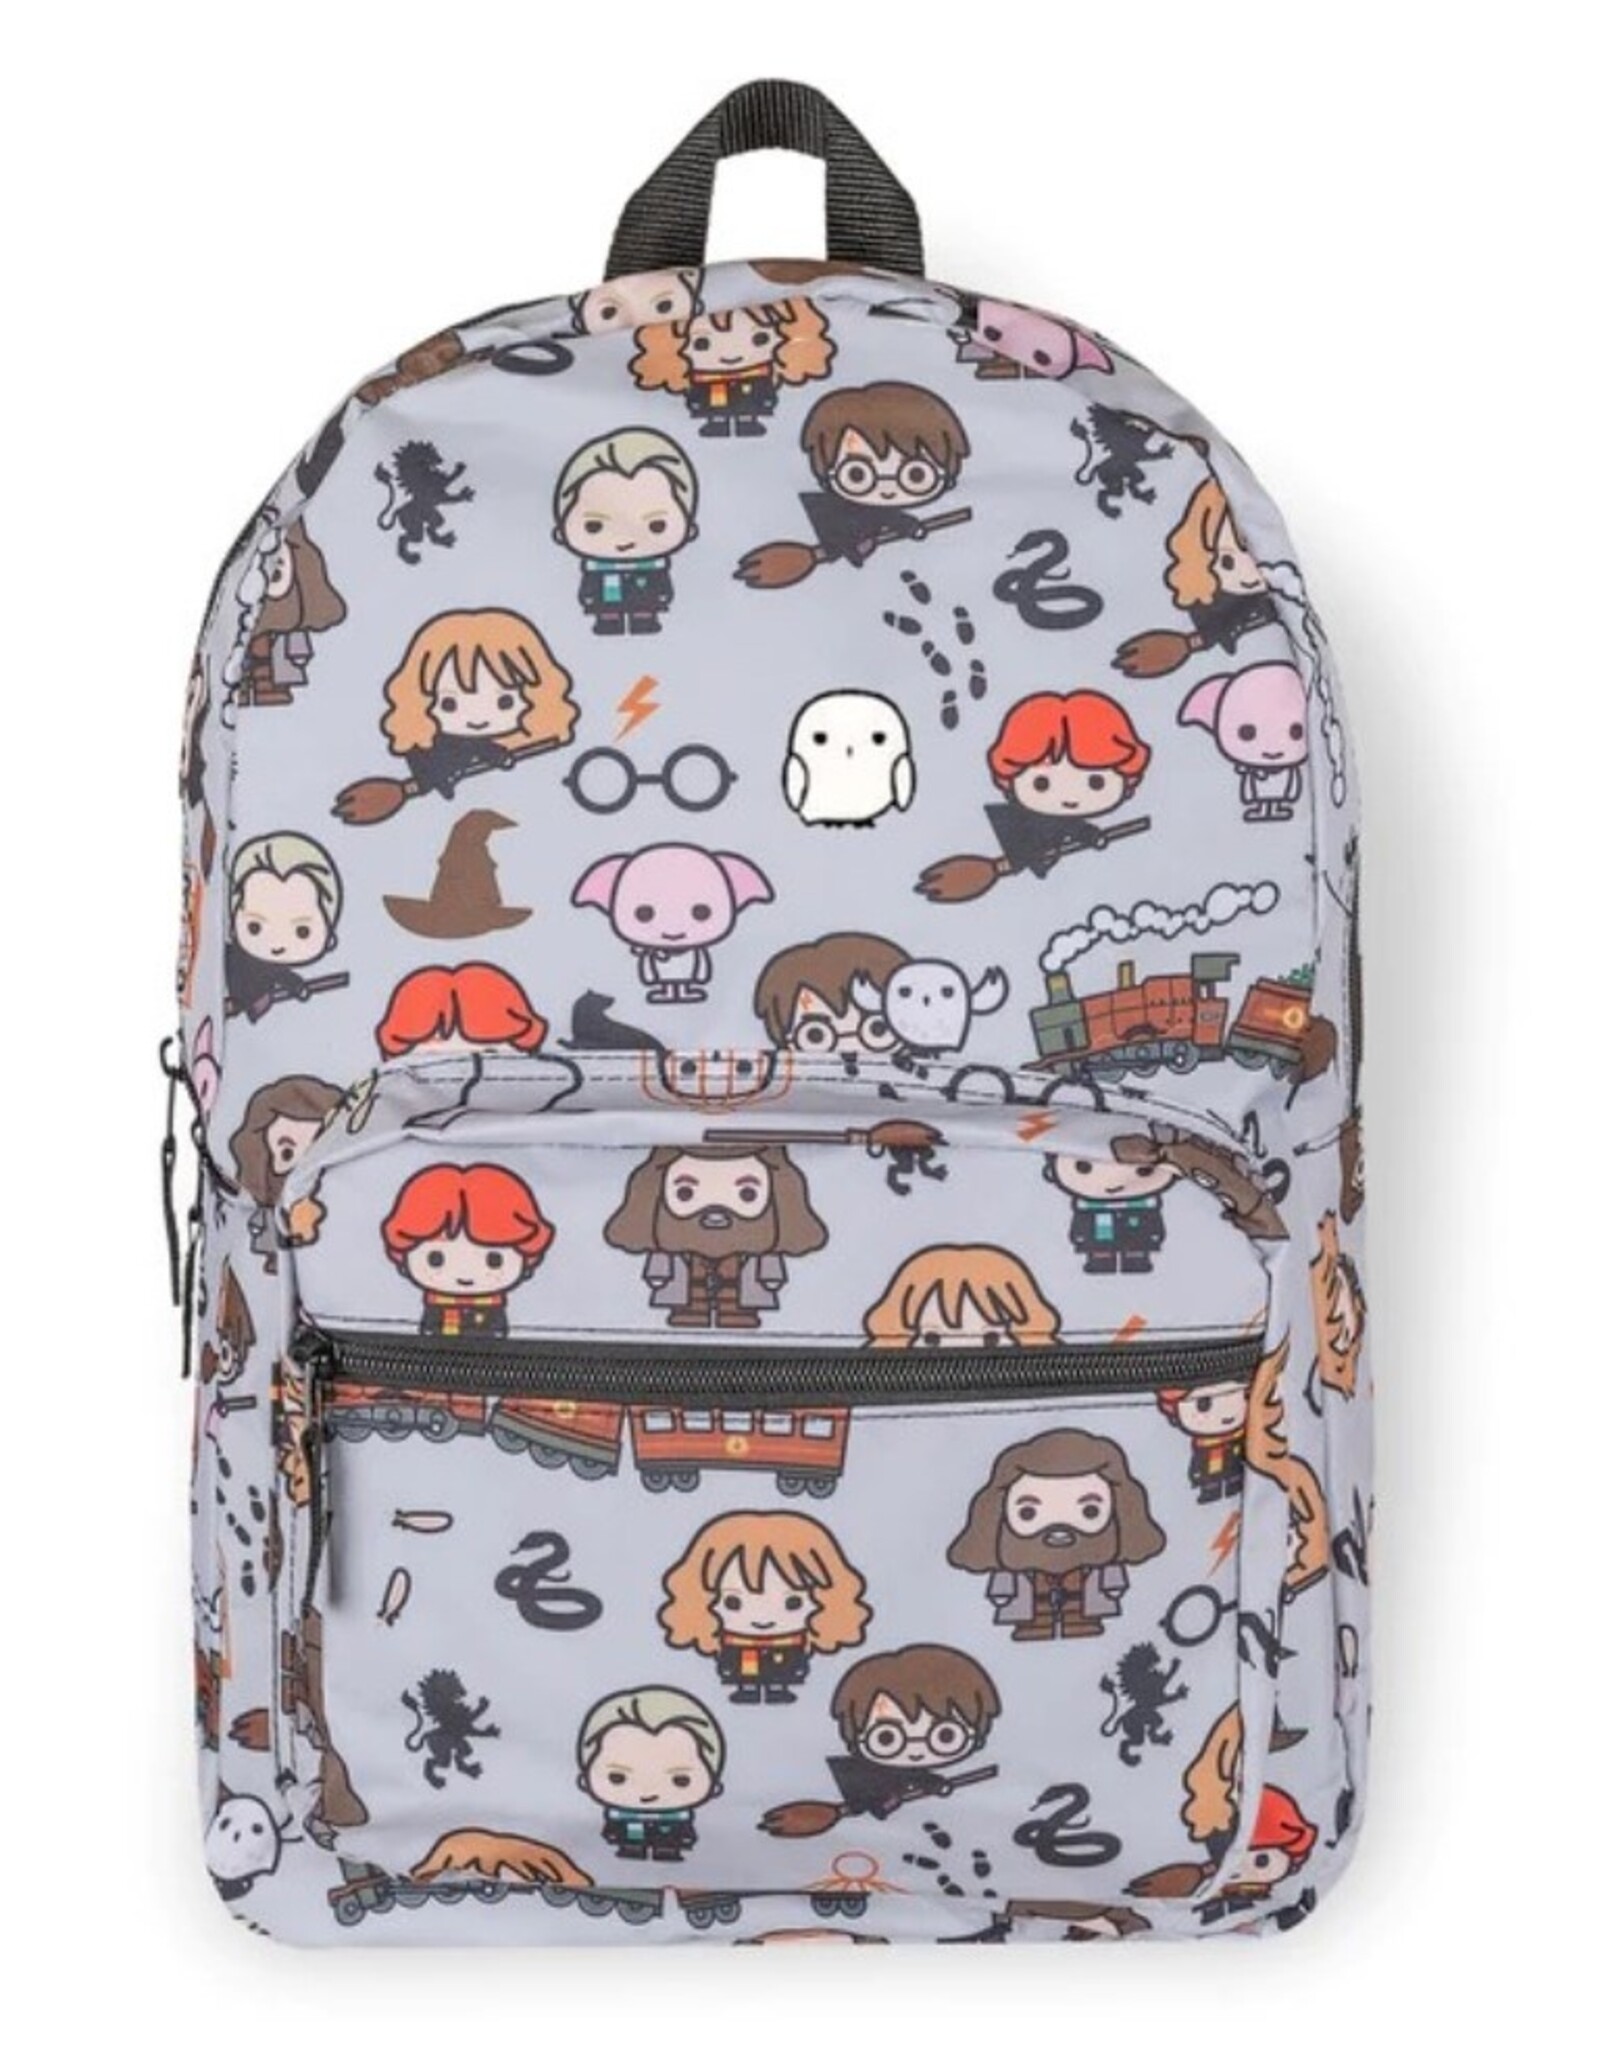 Bioworld Harry Potter bags - Harry Potter Chibi backpack Characters